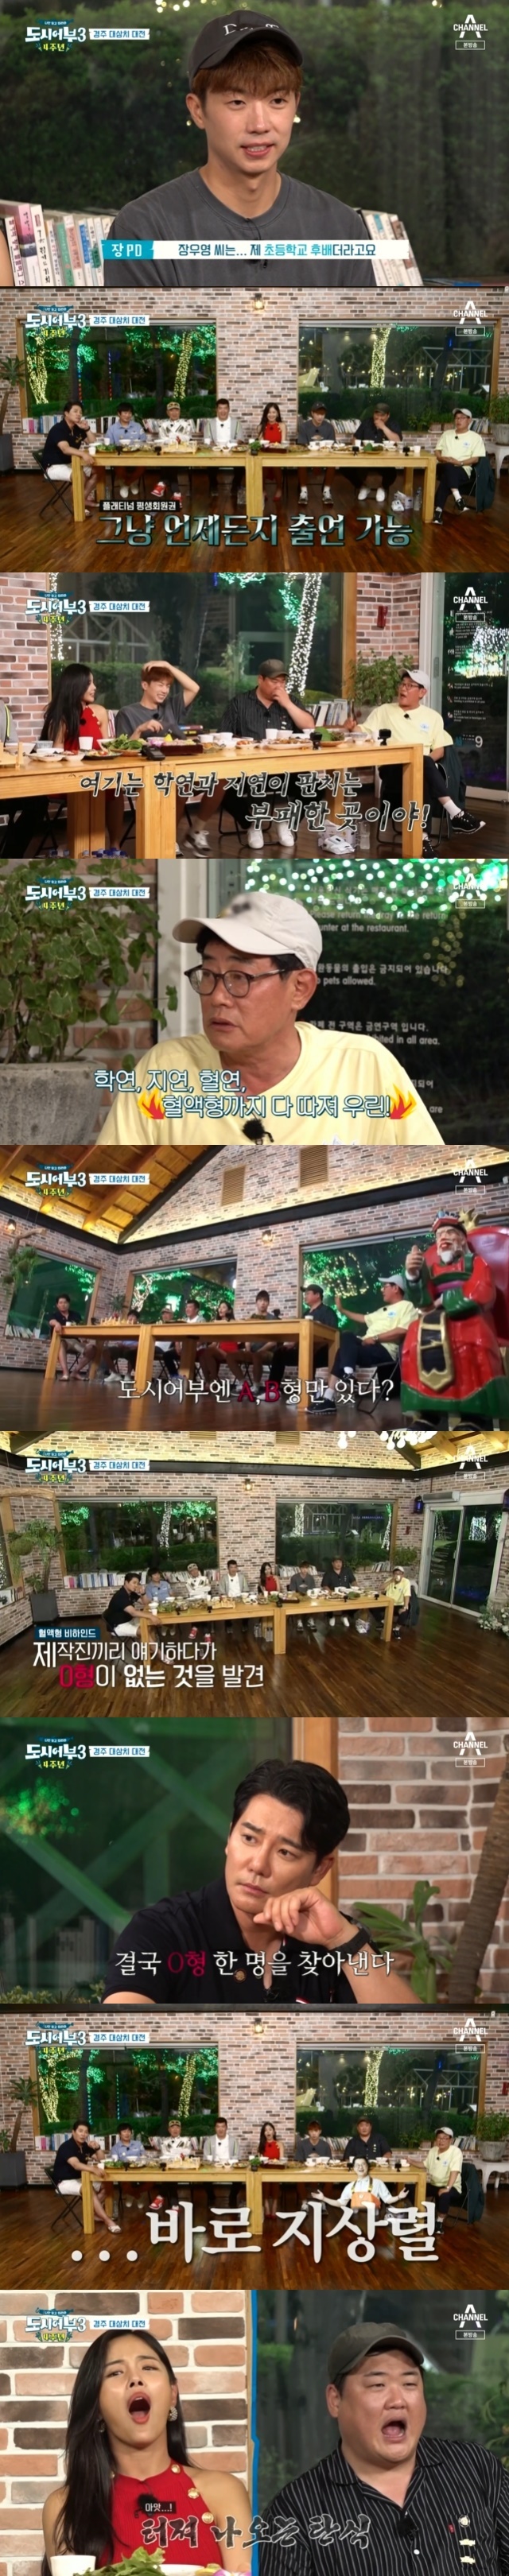 A new hypothesis Blood type theory was raised about why Ji Sang-ryeol failed to join The The Fishermen and the City.In the 18th episode of Channel As entertainment, The Fishermen and the City Season 3 (hereinafter referred to as The The Fishermen and the City), which was broadcast on September 2, a race-to-samchi fishing match was held with former baseball player Jeong Keun-woo, trot singer Jo Min Jung and group 2PM Jung Wooyoung.The match was a team match with two partners, and a golden badge was promised to the first team of Daesamchi and the individual who caught the big one more than 1m.The team is the Stage of Friendship of Lee Deok-hwa Jin Keun-woo, Malchan Doru Muk of Lee Deok-hwa Jin Keun-woo, Tae-gon Lee Soo-geuns Tat and Jangdari, Lee Kyung-kyu Kim Joon-hyuns Lee Bruce and Hong Geumbo, and Jo Min Jung Jung Wooyoung ...and the Among them, the Friendship Stage, which was a lucky guest, was provided with a 10kg Benefit reflecting the confident opinion that the captains condition is good.The Fishermen and the City that went fishing for the full sea.Not only was it composed of Lure Miniforce and Chi Miniforce, but also the top and long legs, which took the lead position of the famous party, literally flew from the beginning of fishing.Lee Soo-geun caught 70, 79cm large ginseng, and Lee Tae-gon also collected 70cm in his first.The fishermens boat then faced the boiling of the Great Tripod (a phenomenon in which fish jumped onto the surface and appeared to boil water) during the point shift.The Fishermen and the City were burned to the storm reeling, and in particular, the Jin Keun-woo was impressed by the 99cm large ginseng.There were as many as 12 samchis that came out to The Fishermen and the City during the 23-minute Boyling.The results of the mid-ranked were completely overturned through the Boyling Time, with the leading top and long legs ranked third, while the first and second places were Malchan Dorumuk and Lee and Hong Geumbo.All 11 marriages of Malchandorumuk were meat from the time of the boying.The fishermen went fishing again in the afternoon after lunch and two hours of rest, and at the same time arrived at Boyling Point.Tats and long legs almost ran out of Samchi, and Jung Wooyoung also caught the 80cm Samchi for the first time and washed the stigma of No Samchi in 8 and a half hours.Joe Min Jung, who had the last no-samchi record, also caught a large 82cm-sized large-samchi and said, Im fishing in this taste.I want my body to fall into the sea, so I want to have a big one. After the first, second and third places were all 1kg apart, the 14-hour fishing of the great ginseng fish was over.The fourth place was the stage of friendship of 15.79kg, the third place was Lee, 23.58kg, and the second place was only 1.2kg less than the first place.Jin Keun-woo, who not only caught his personal maximum on his first appearance but also received a golden badge for his general weight, pledged to do better in his next appearance.With the right to re-appear and follow the The The Fishermen and the City and the Jeong Keun-woo, Zhang PD said, Jung Wooyoung has learned that he is a junior of my Elementary school.I can reappear at any time, he said, giving a very special notice and laughing. Both of them were from Busan Elementary School.Lee Kyung-kyu said, This is the school and the Torrente 3: El protector where Ji-yeon is playing.I left Dongsung High School, Jeong Keun-woo came out of Dongsung Middle School, Jung Wooyoung came out of Dongsung Elementary School.Ji-yeon blood blood blood Blood type is all the way, we shouted. The unexpected fact that was revealedThe Fishermen and the City City fixed performers were all Types A and B.Here, Jung Wooyoung put it with a sense of That is type B, and Jang PD said, I did not know why there was type O, but I found one.Ji Sang-ryeol was O-type, he said, creating a funny situation. Lee Deok-hwa, who is in a bursting sigh, said, I talked to Sang-ryul, but my phone number changed. 